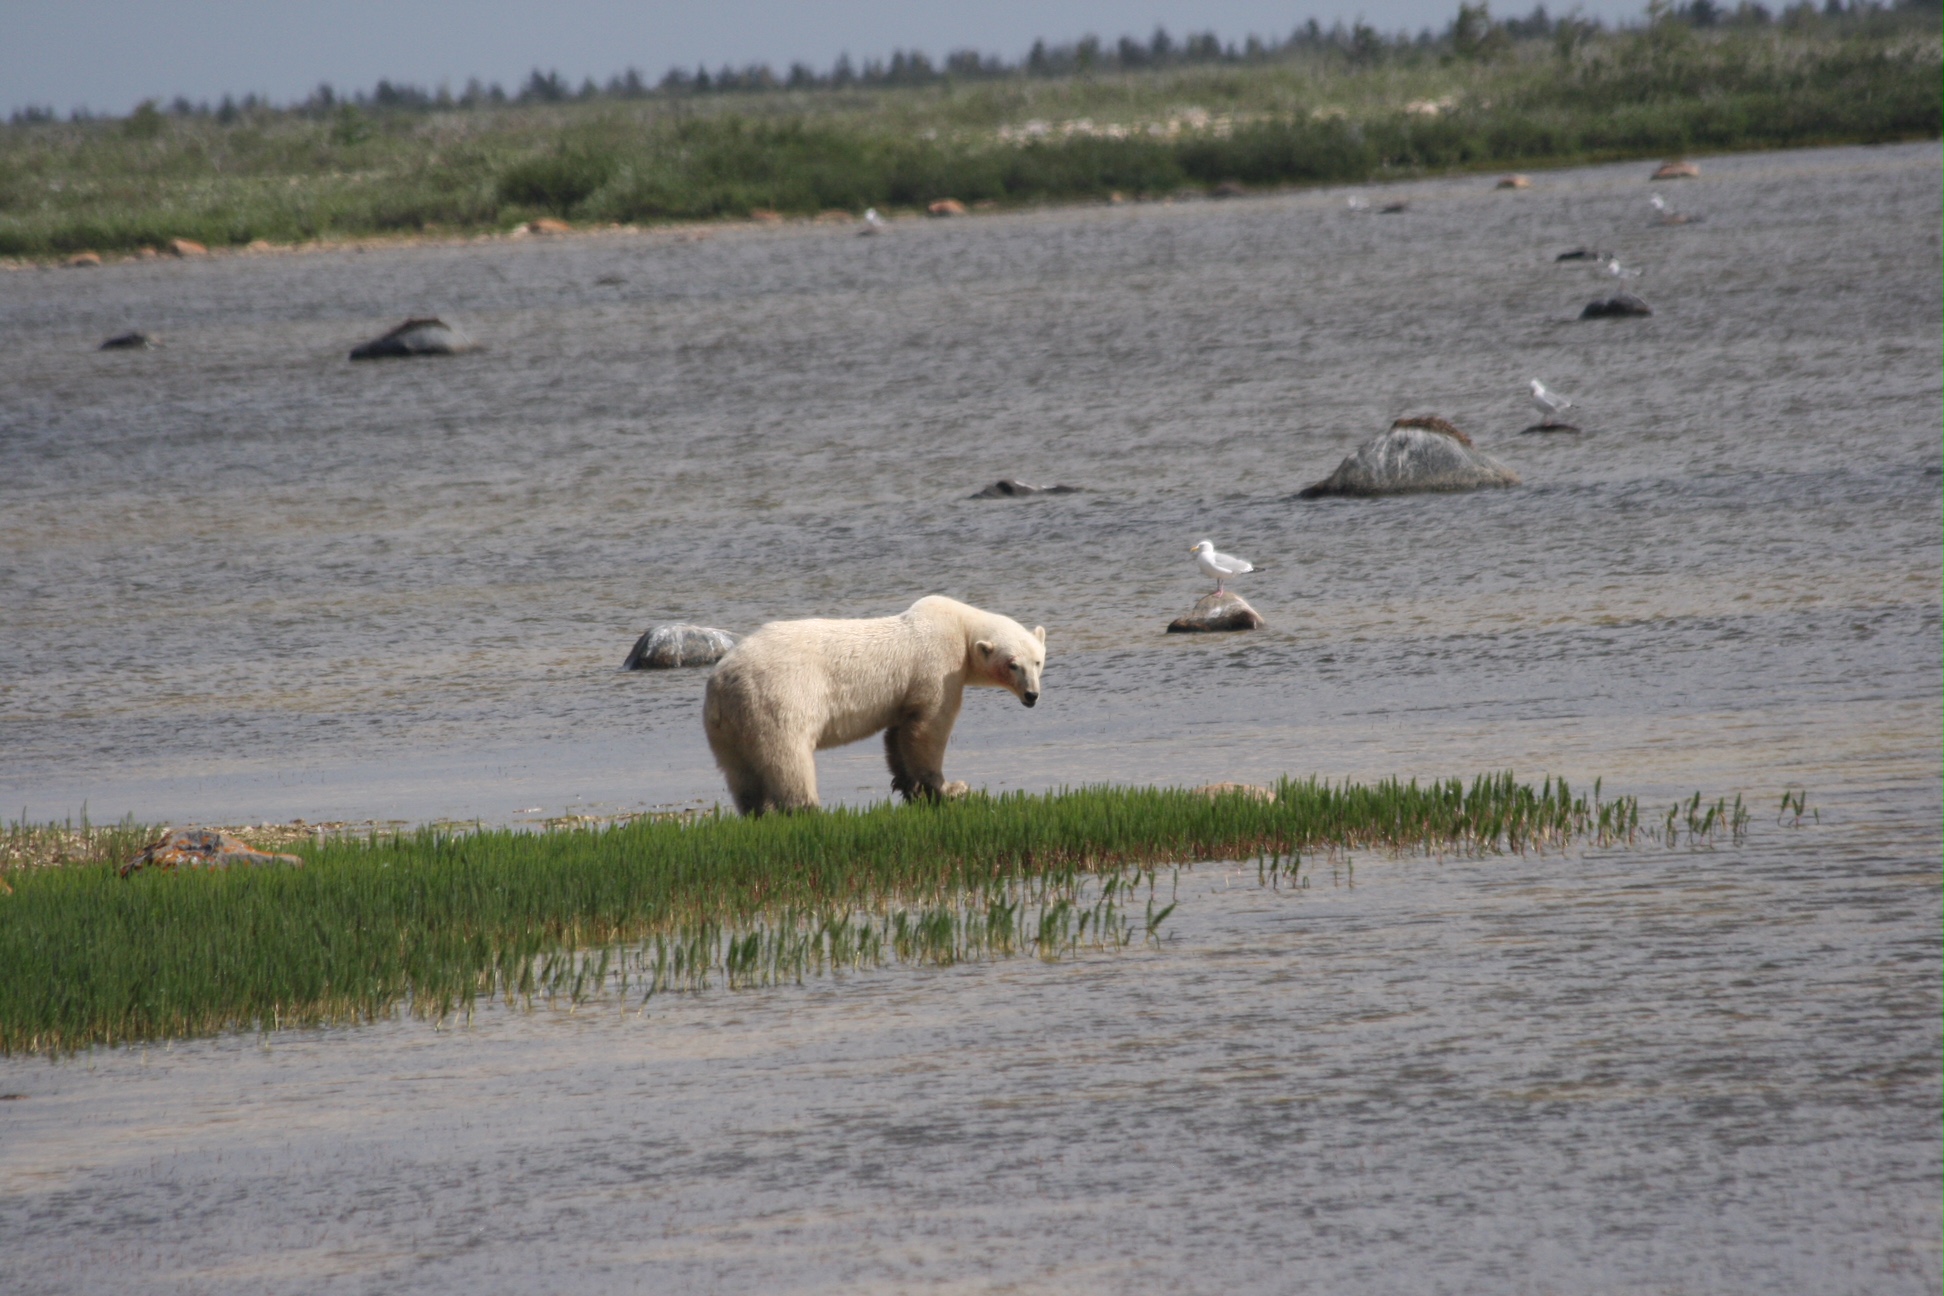 landscape image of a polar bear standing on a small piece of land surrounded by water